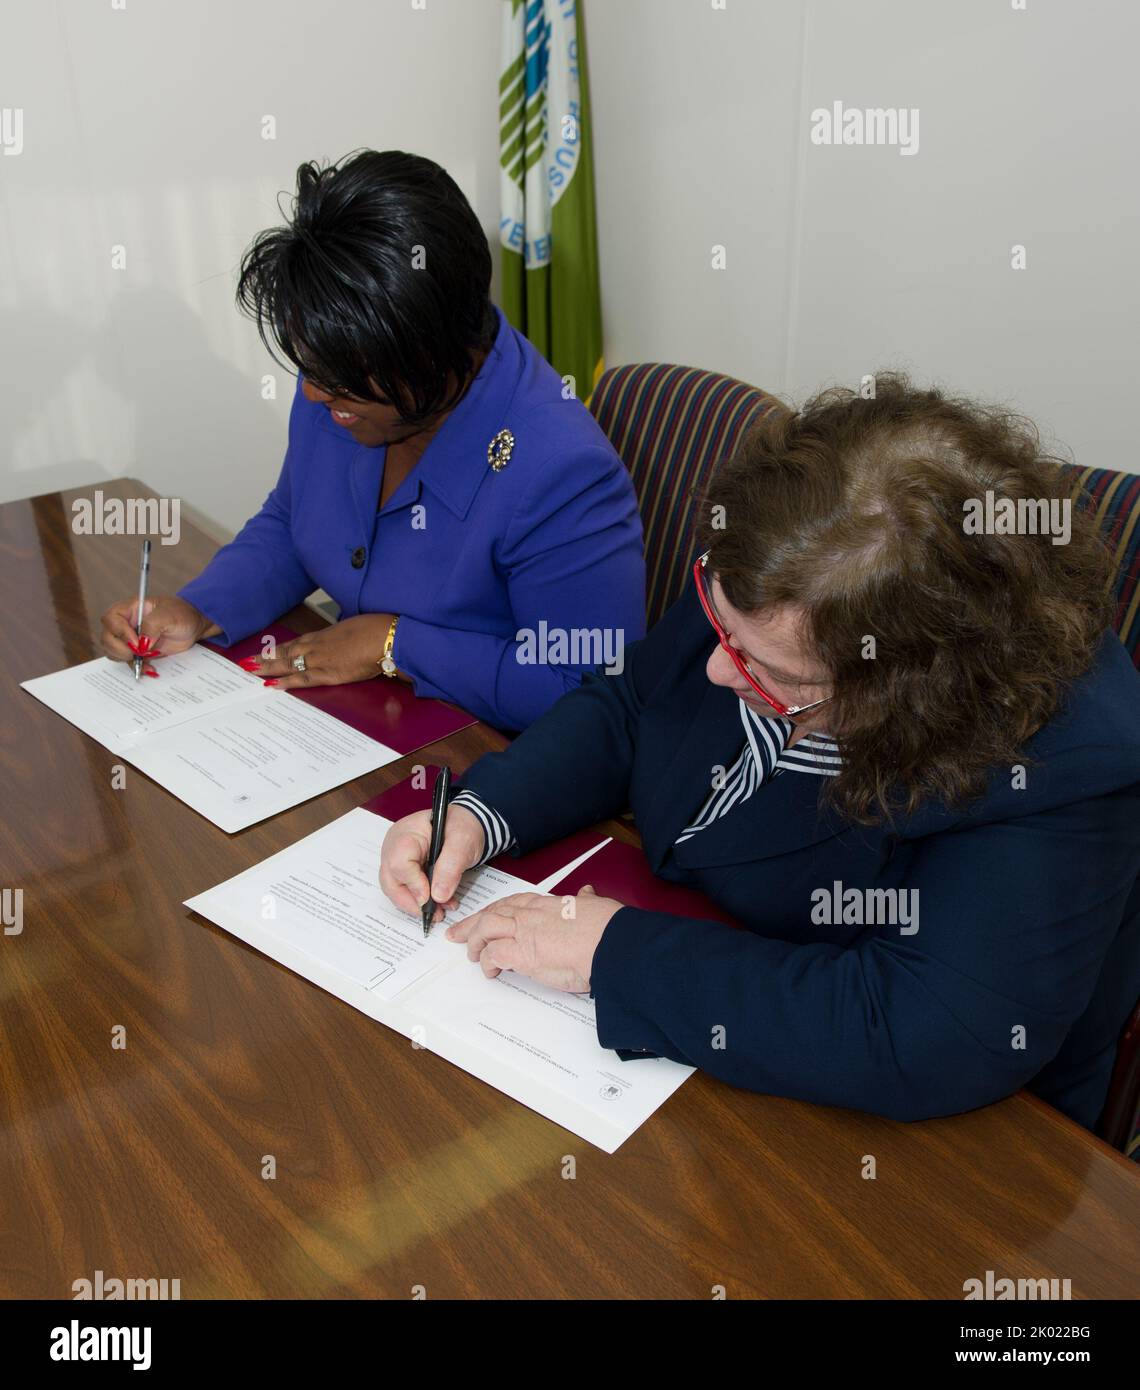 Service agreement signing, with Chief Human Capital Officer Janie Payne, Office of Field Policy and Management Director Patricia Hoban-Moore, and other officials on hand. Stock Photo